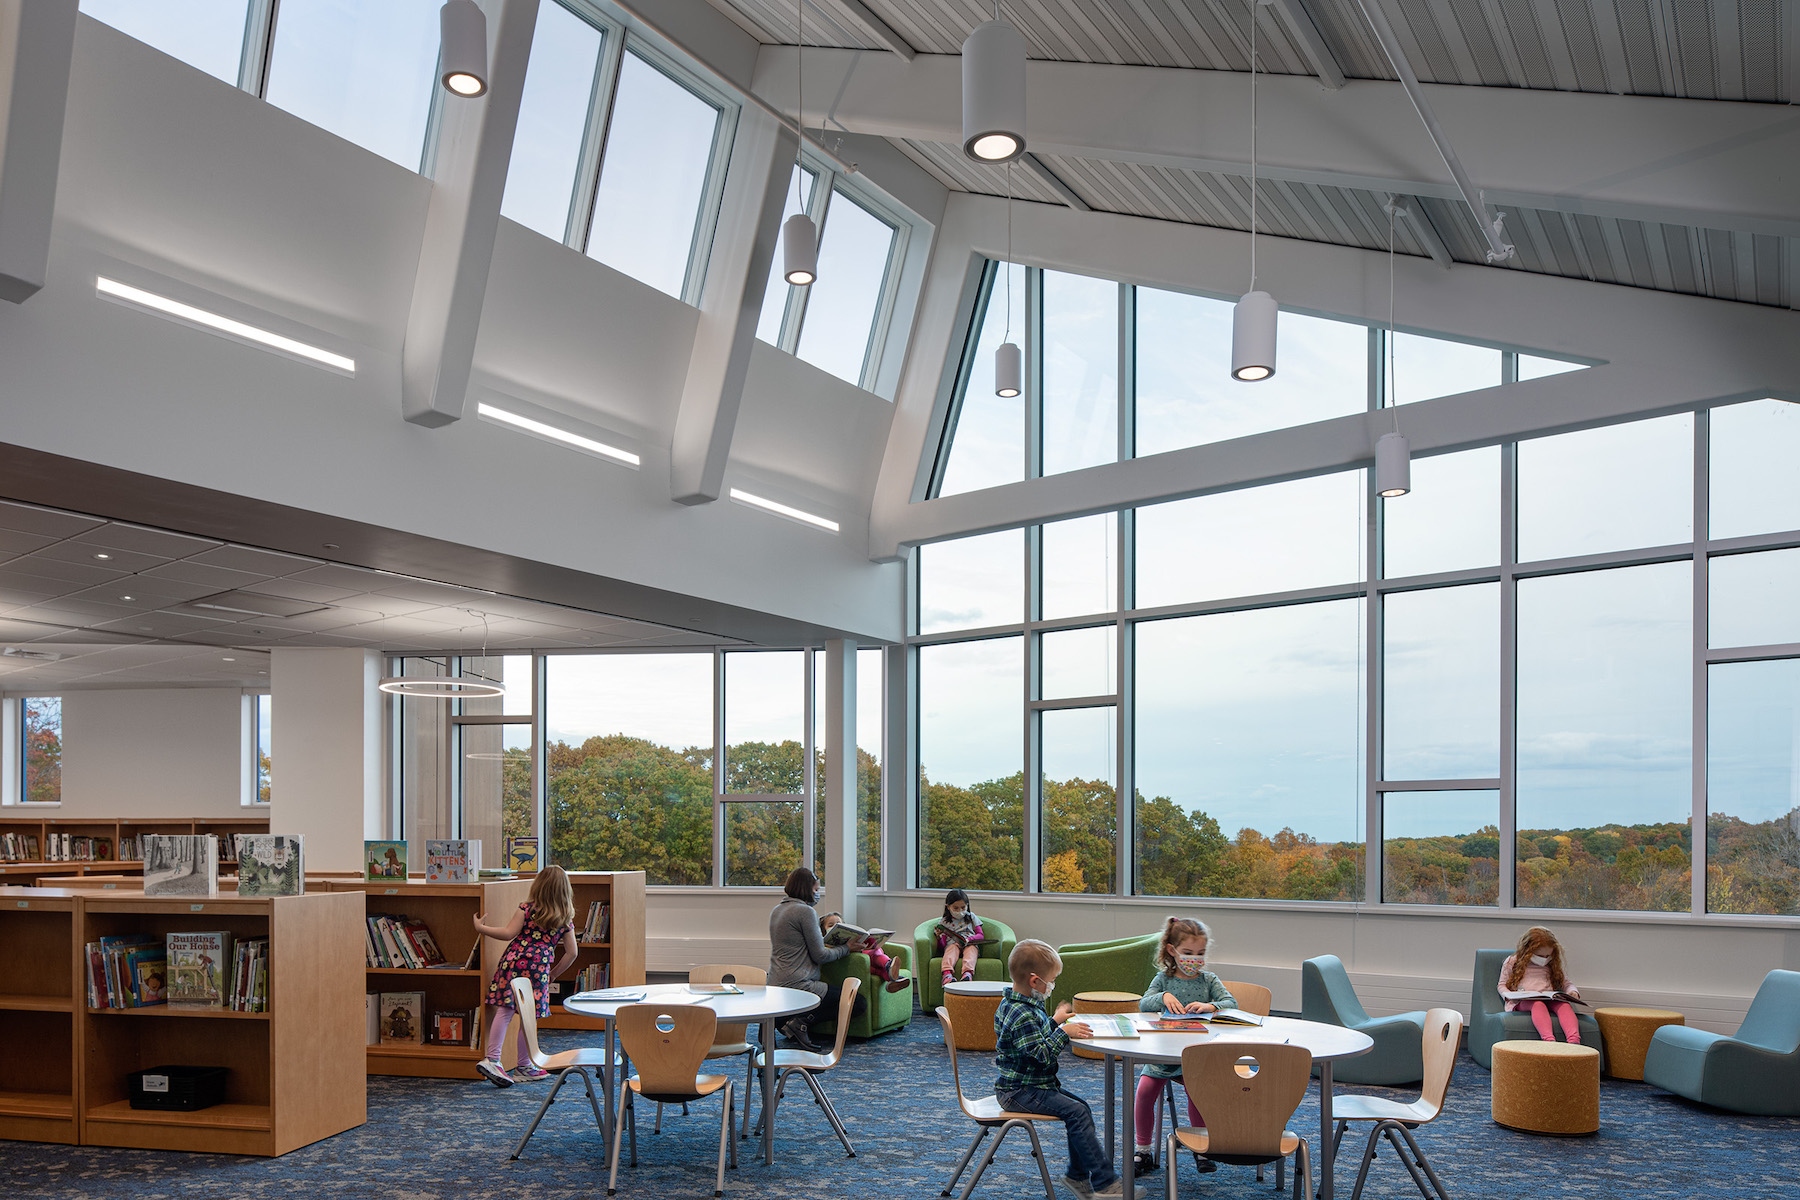 Annie E. Fales Elementary School lets in lots of natural light. Images: Ed Wonsek